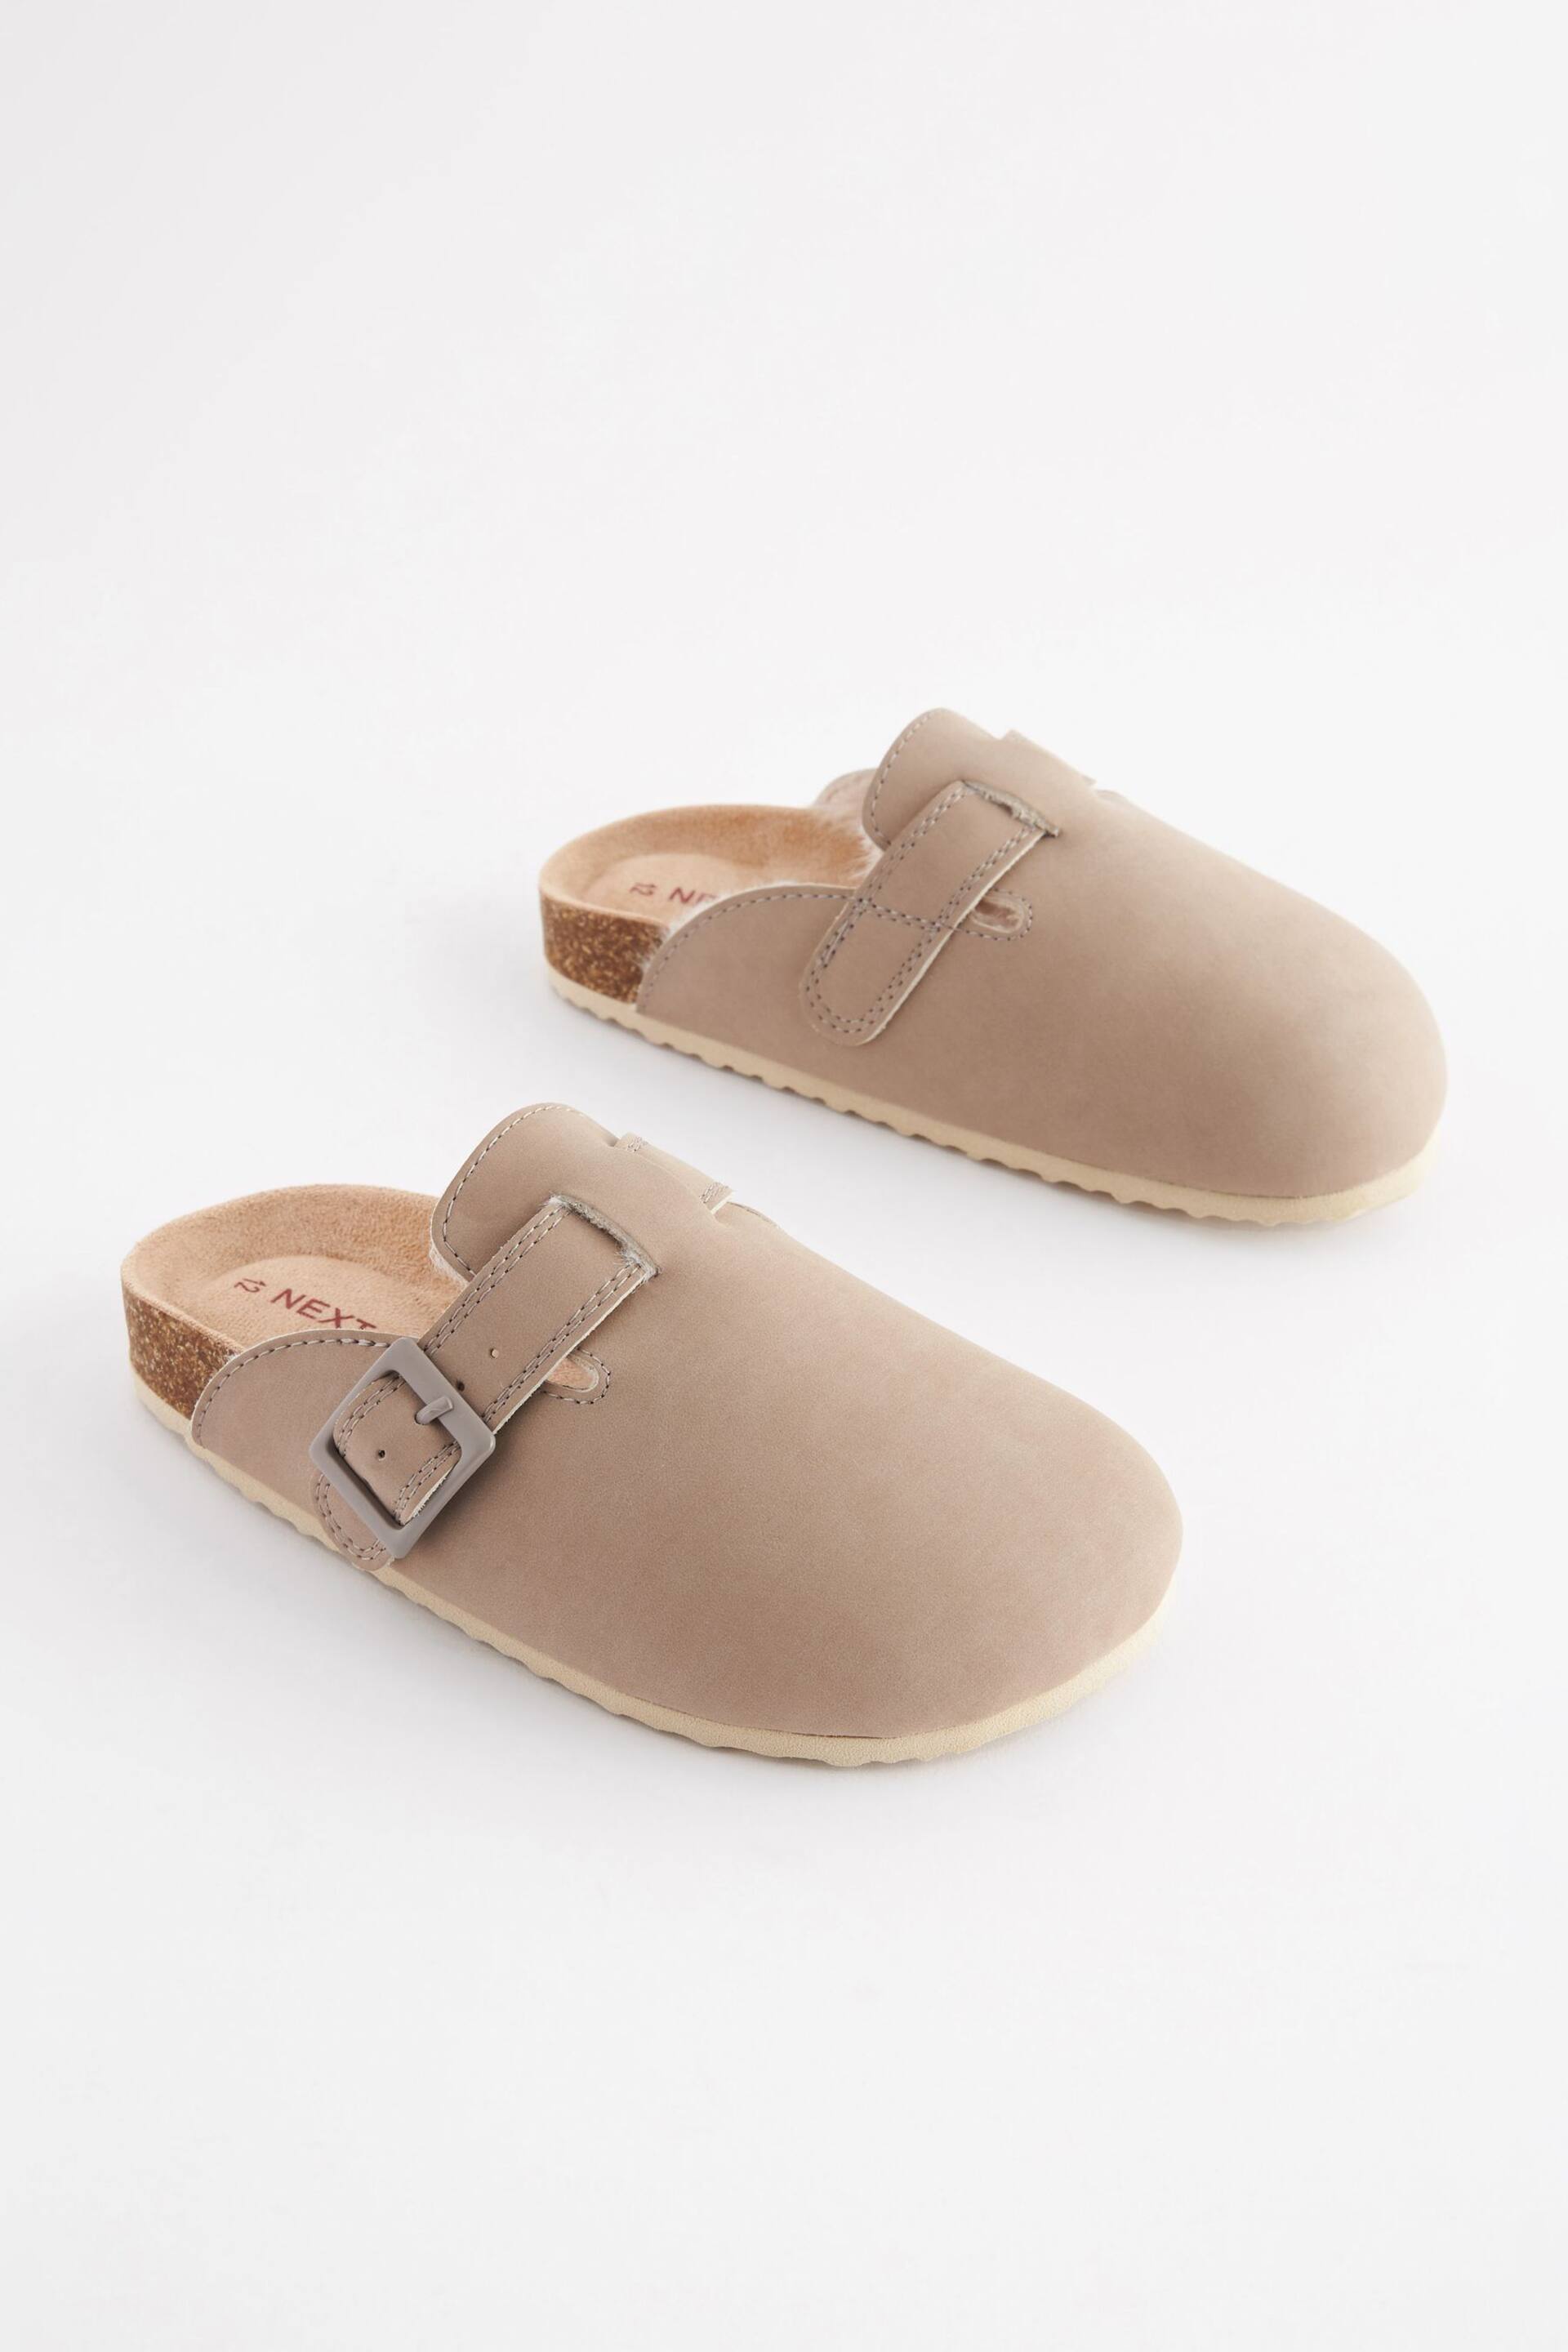 Neutral Stone Clog Slippers - Image 1 of 5